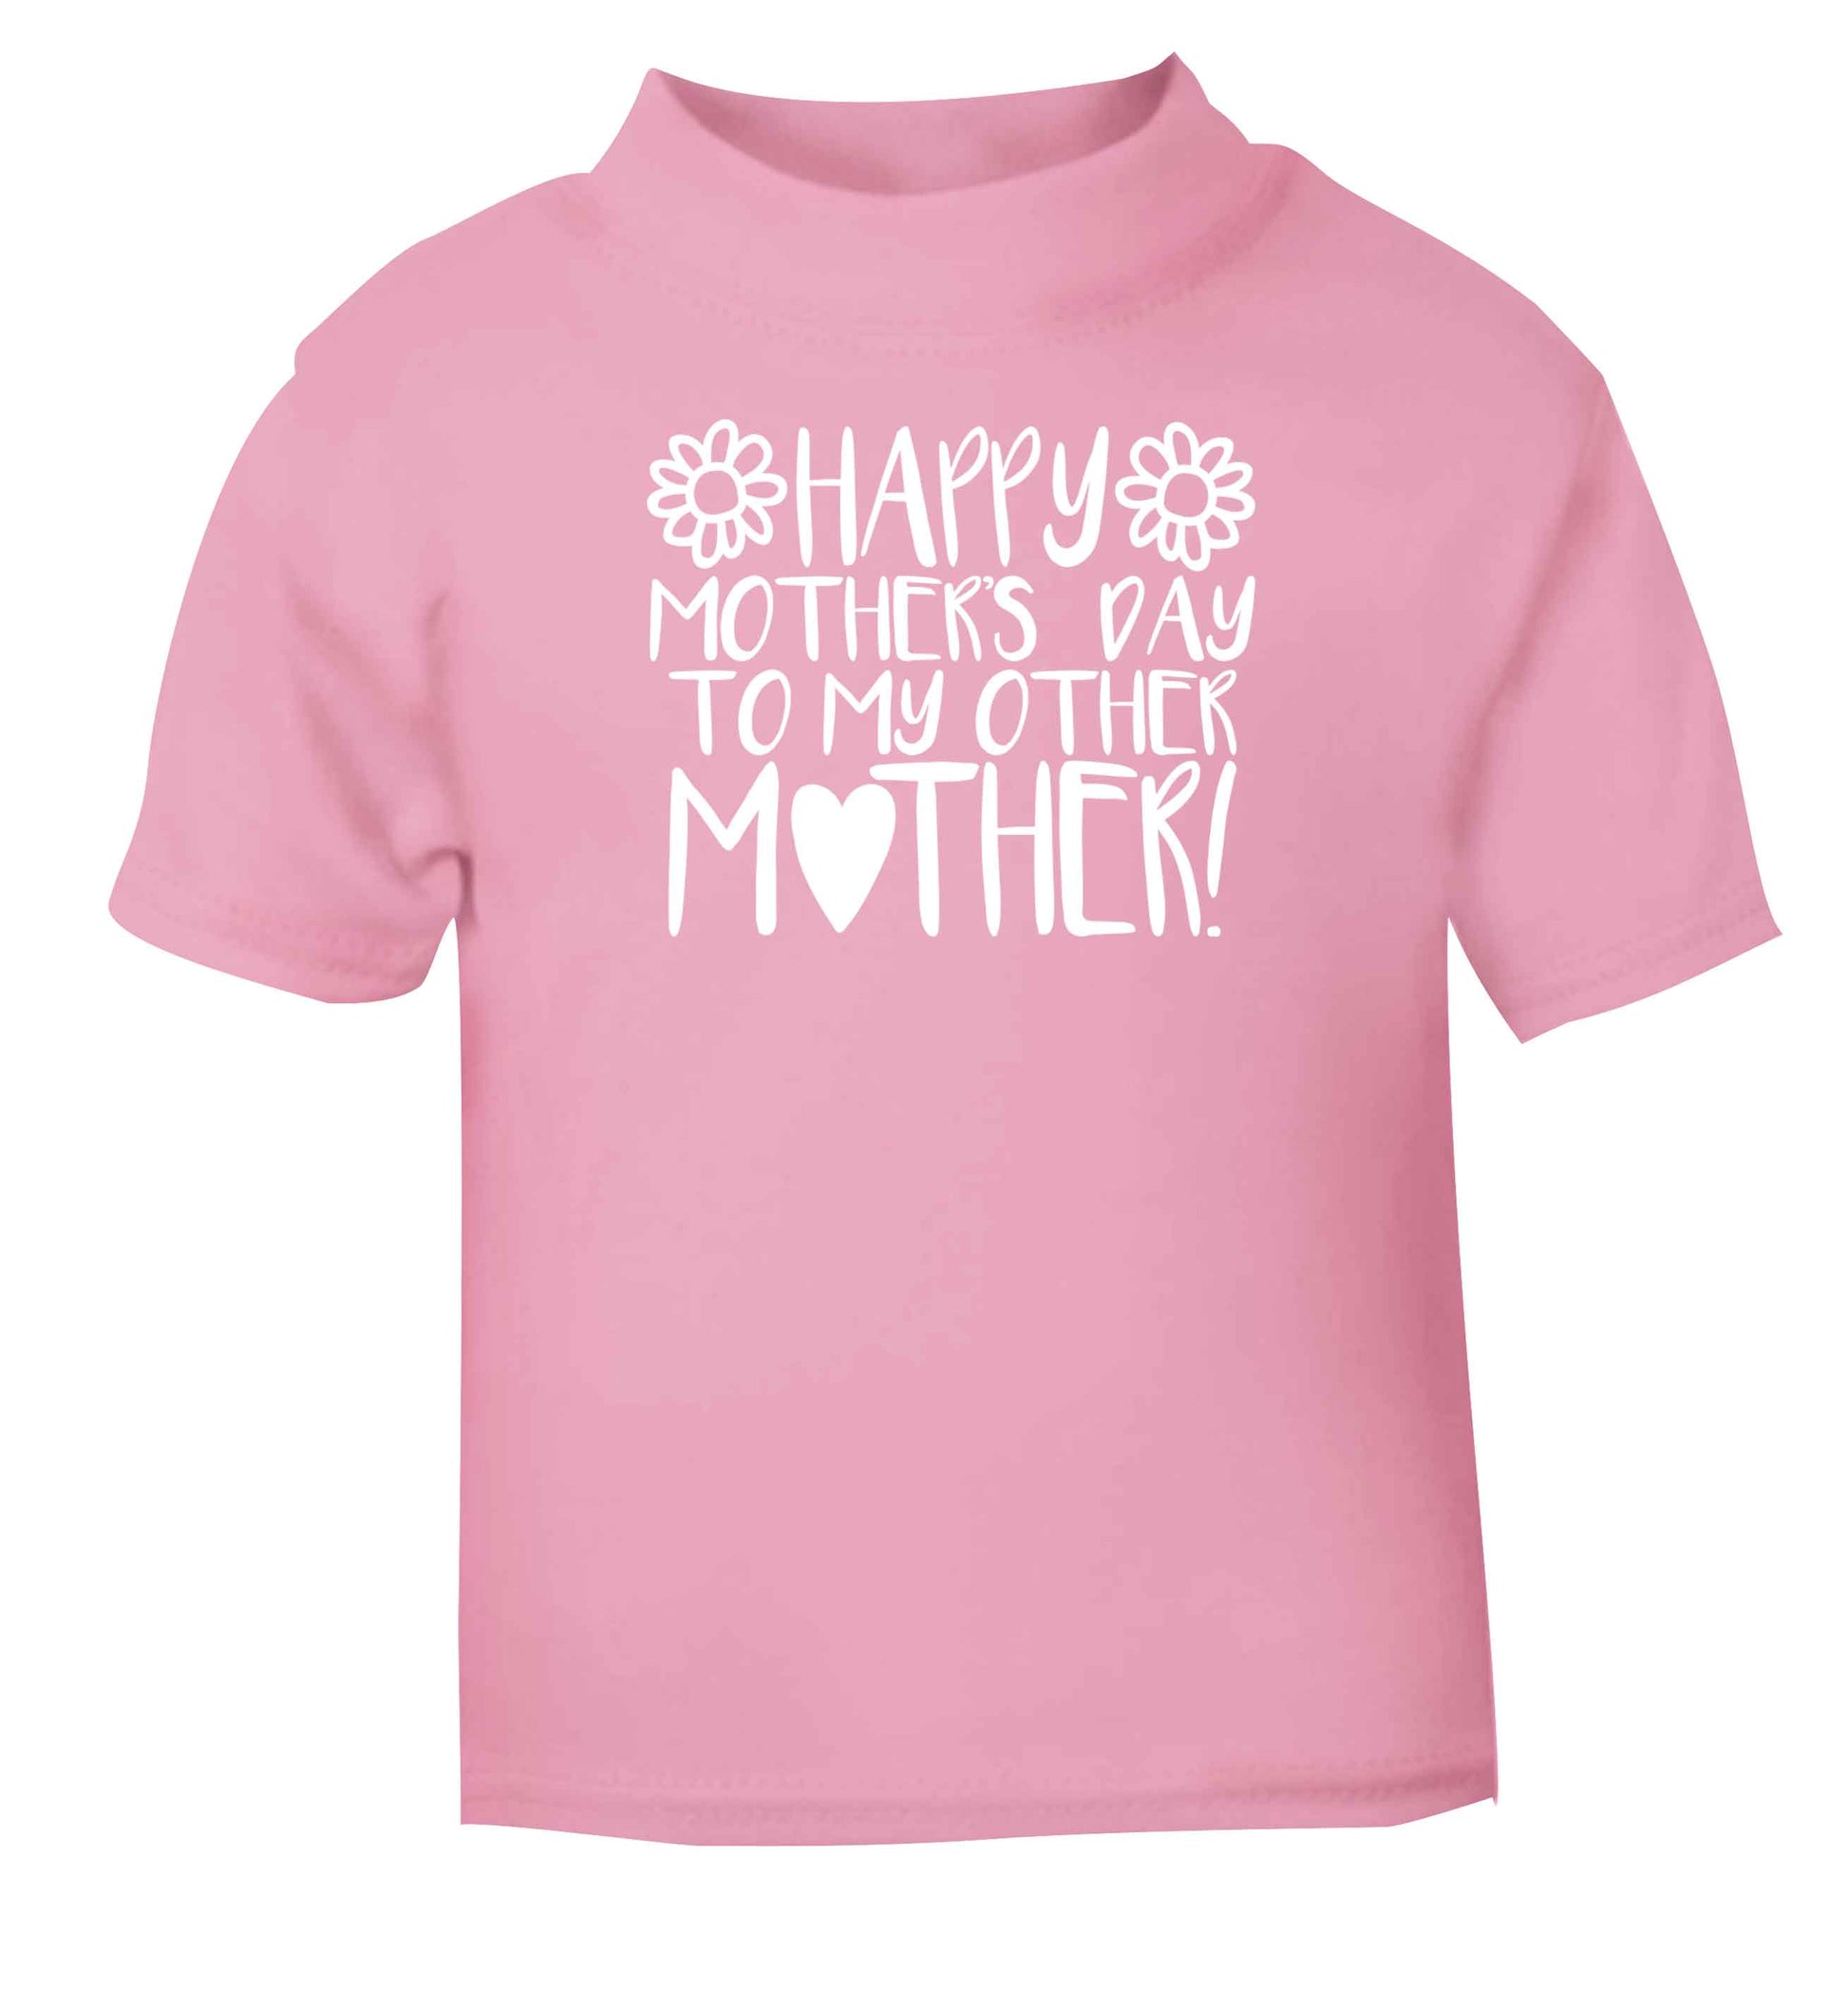 Happy mother's day to my other mother Children's light pink Tshirt 12-13 Years